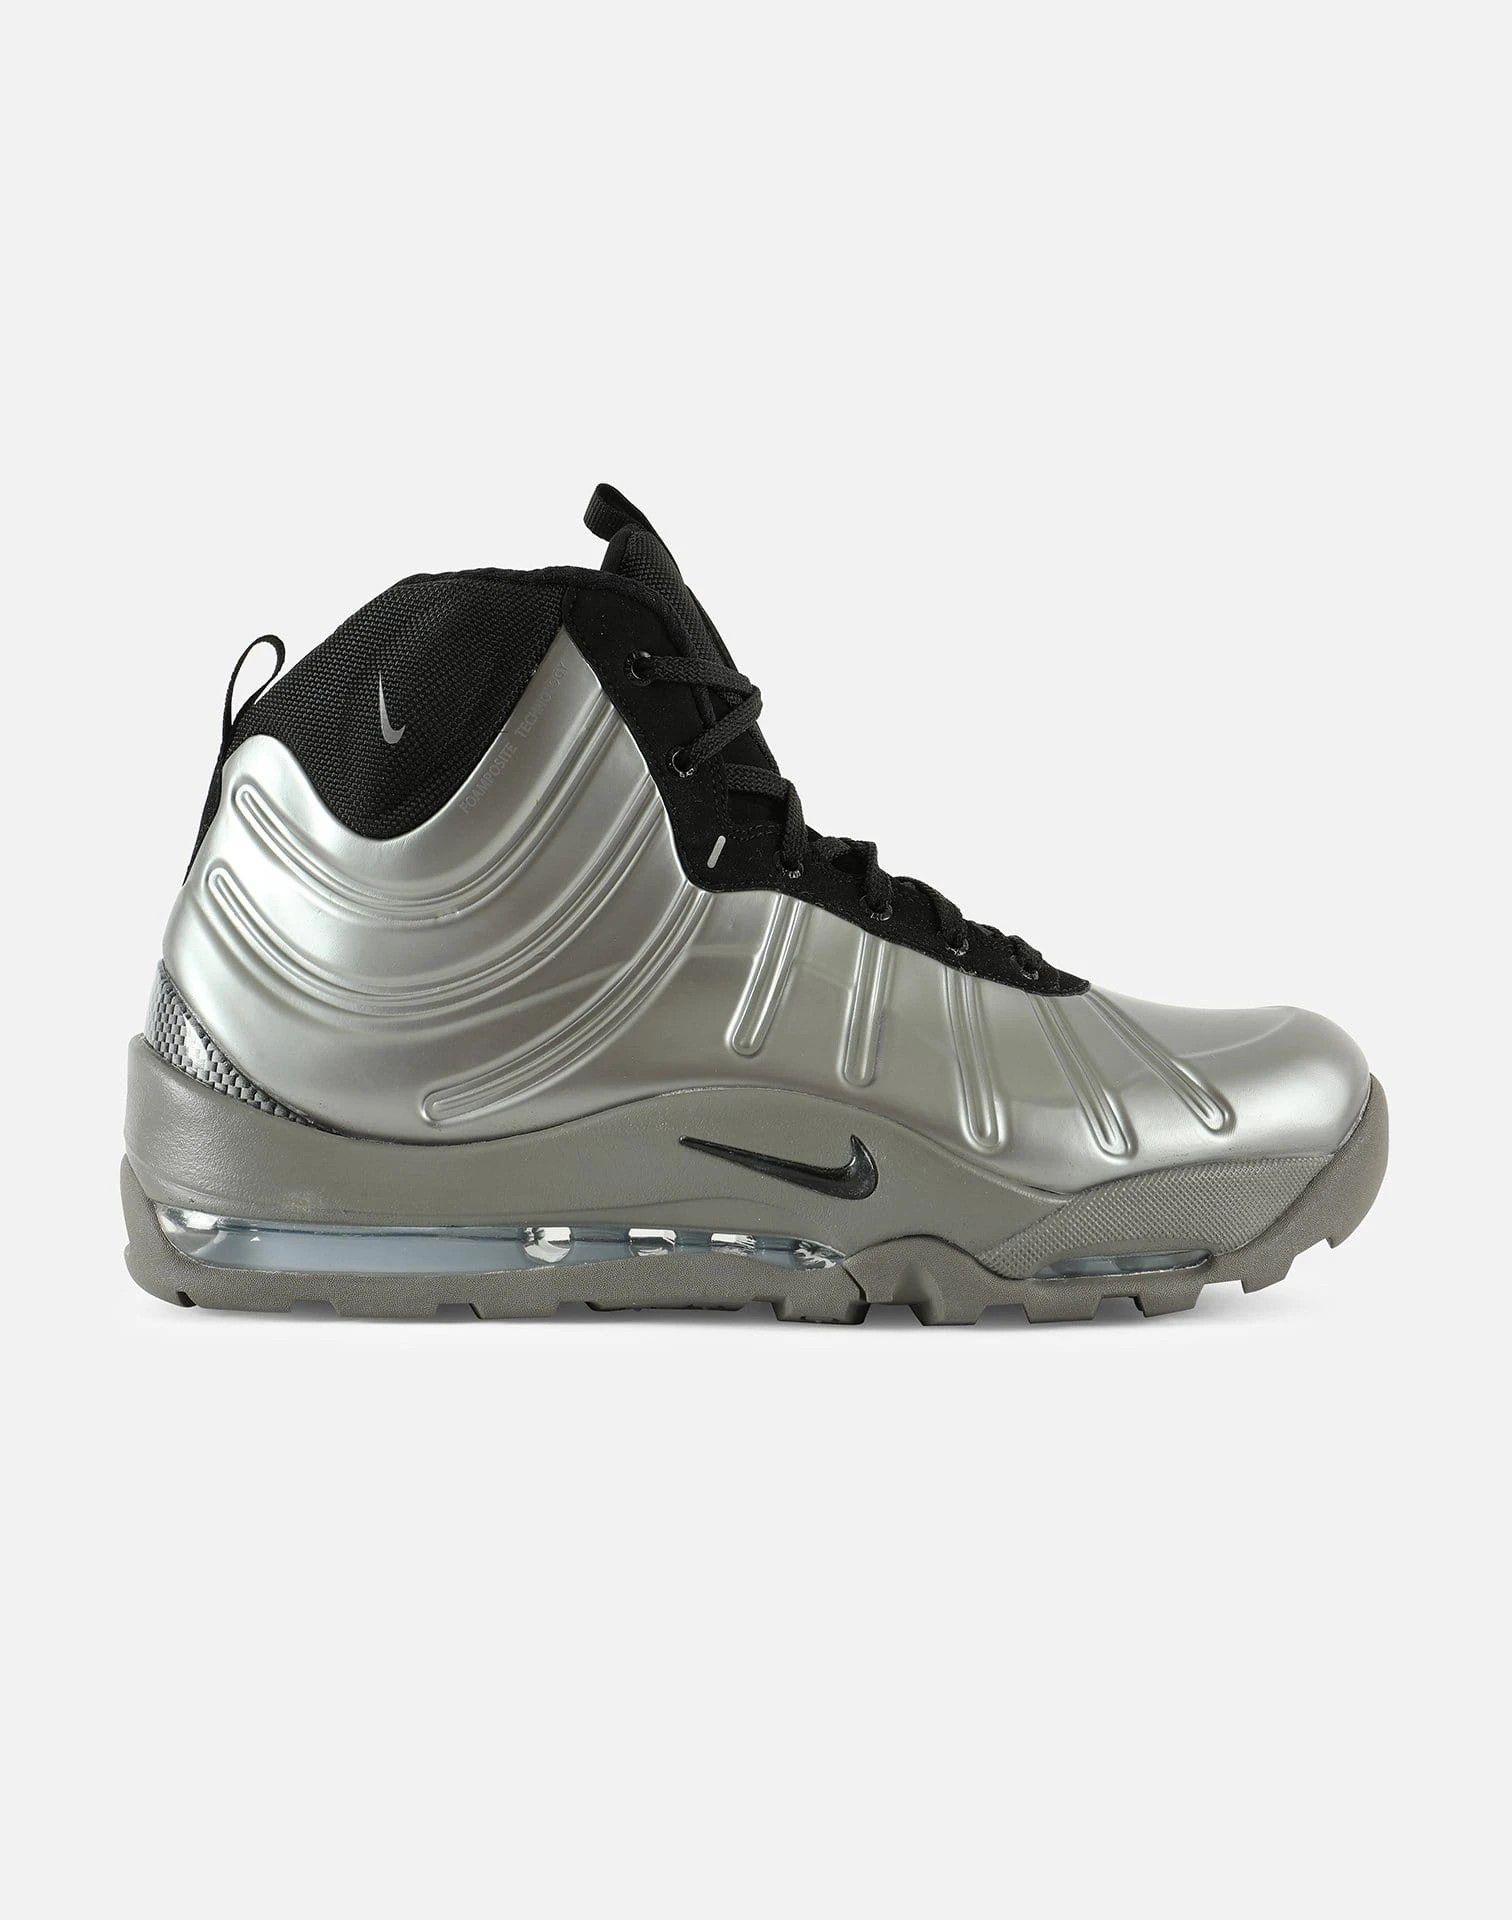 Get 'm before they are gone at this price - New Nike Bakin Posites, Metallic Pewter, Sz: 10